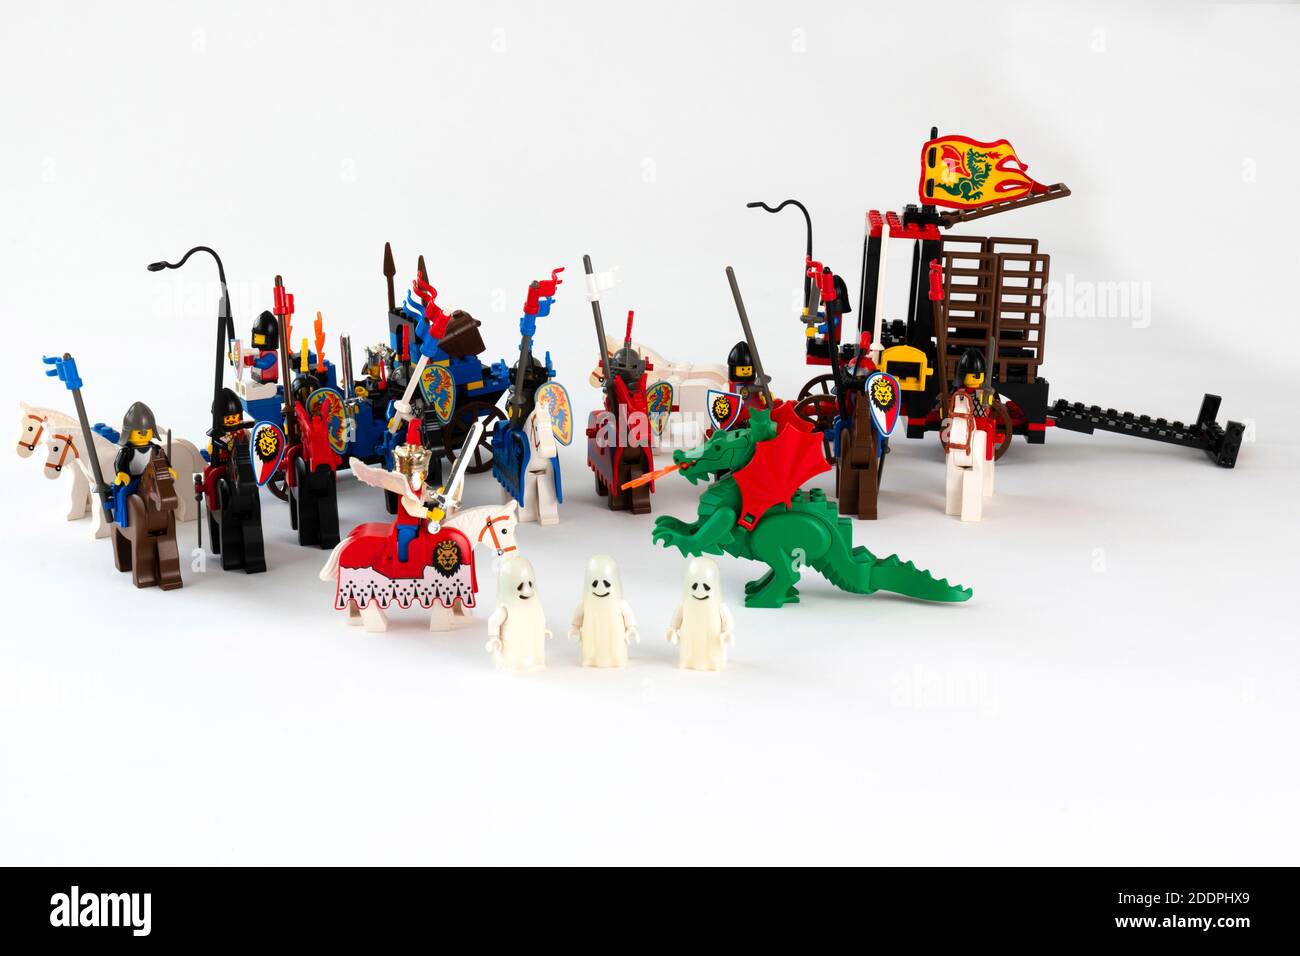 Lego knights set with dragon from the 1990's Stock Photo - Alamy